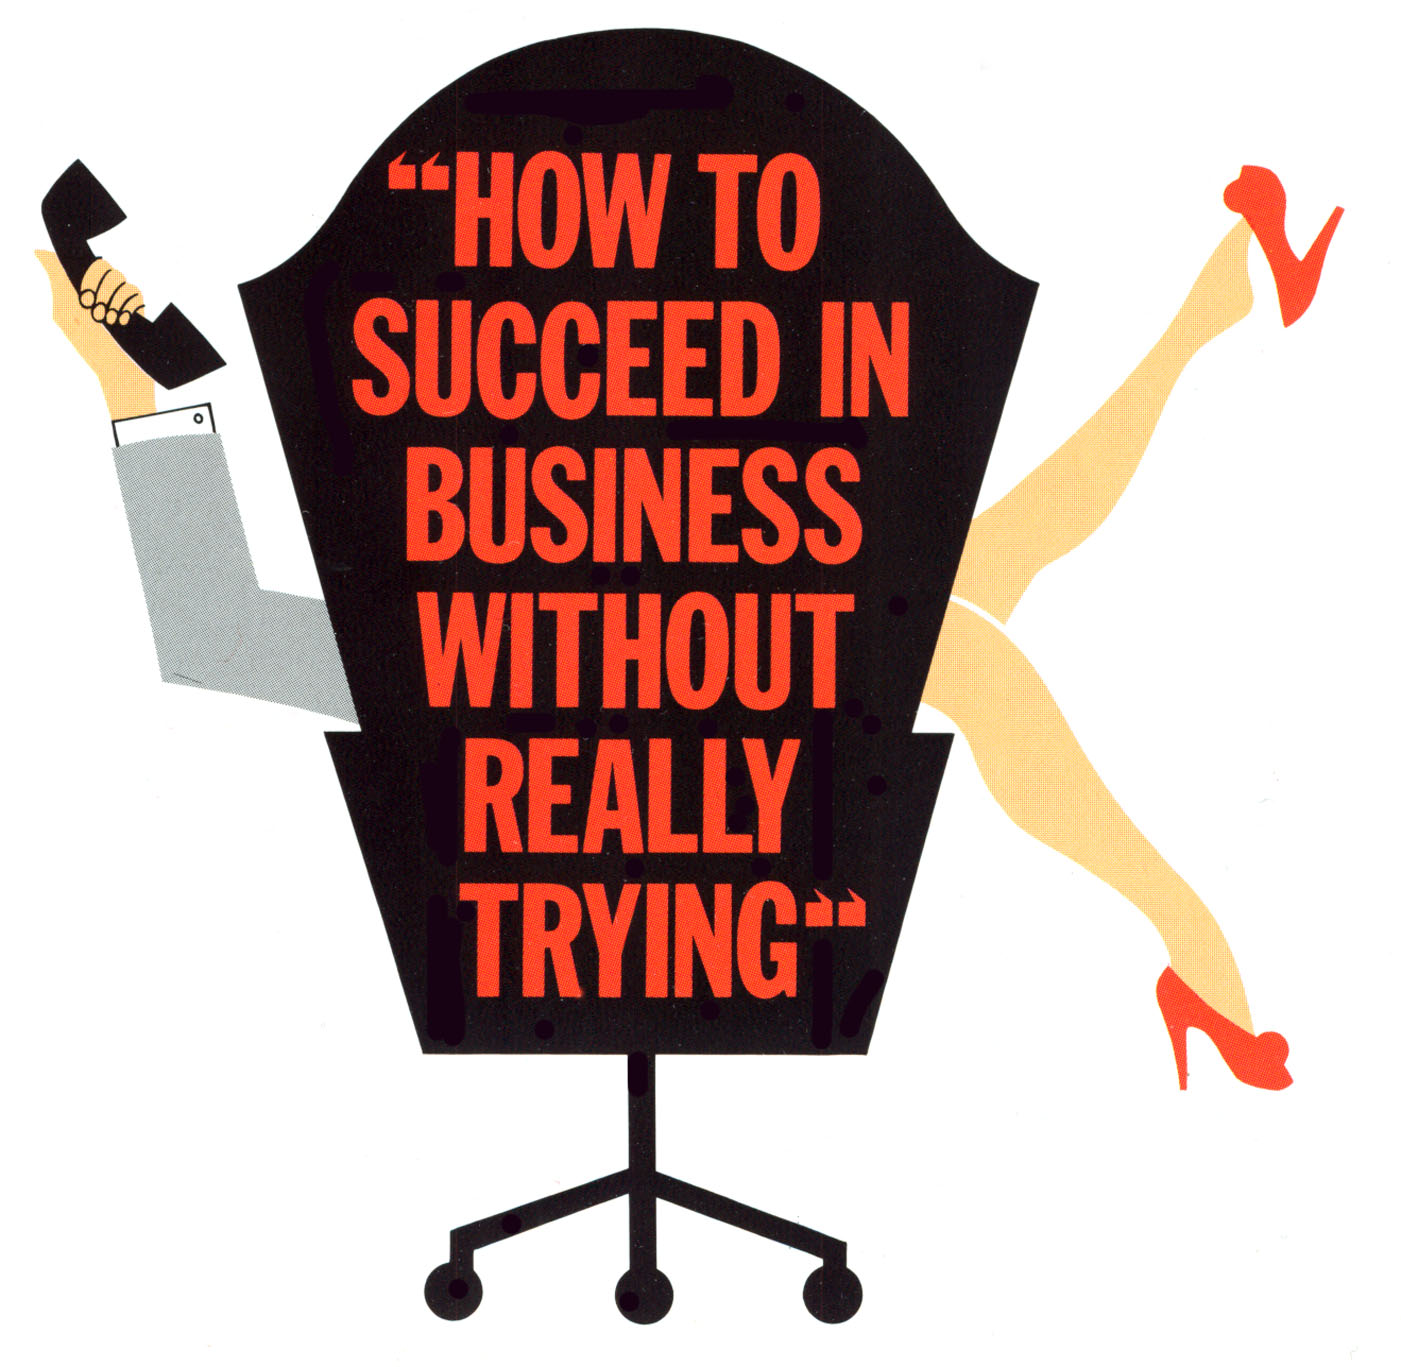 How To Succeed in Business Without Really Trying logo